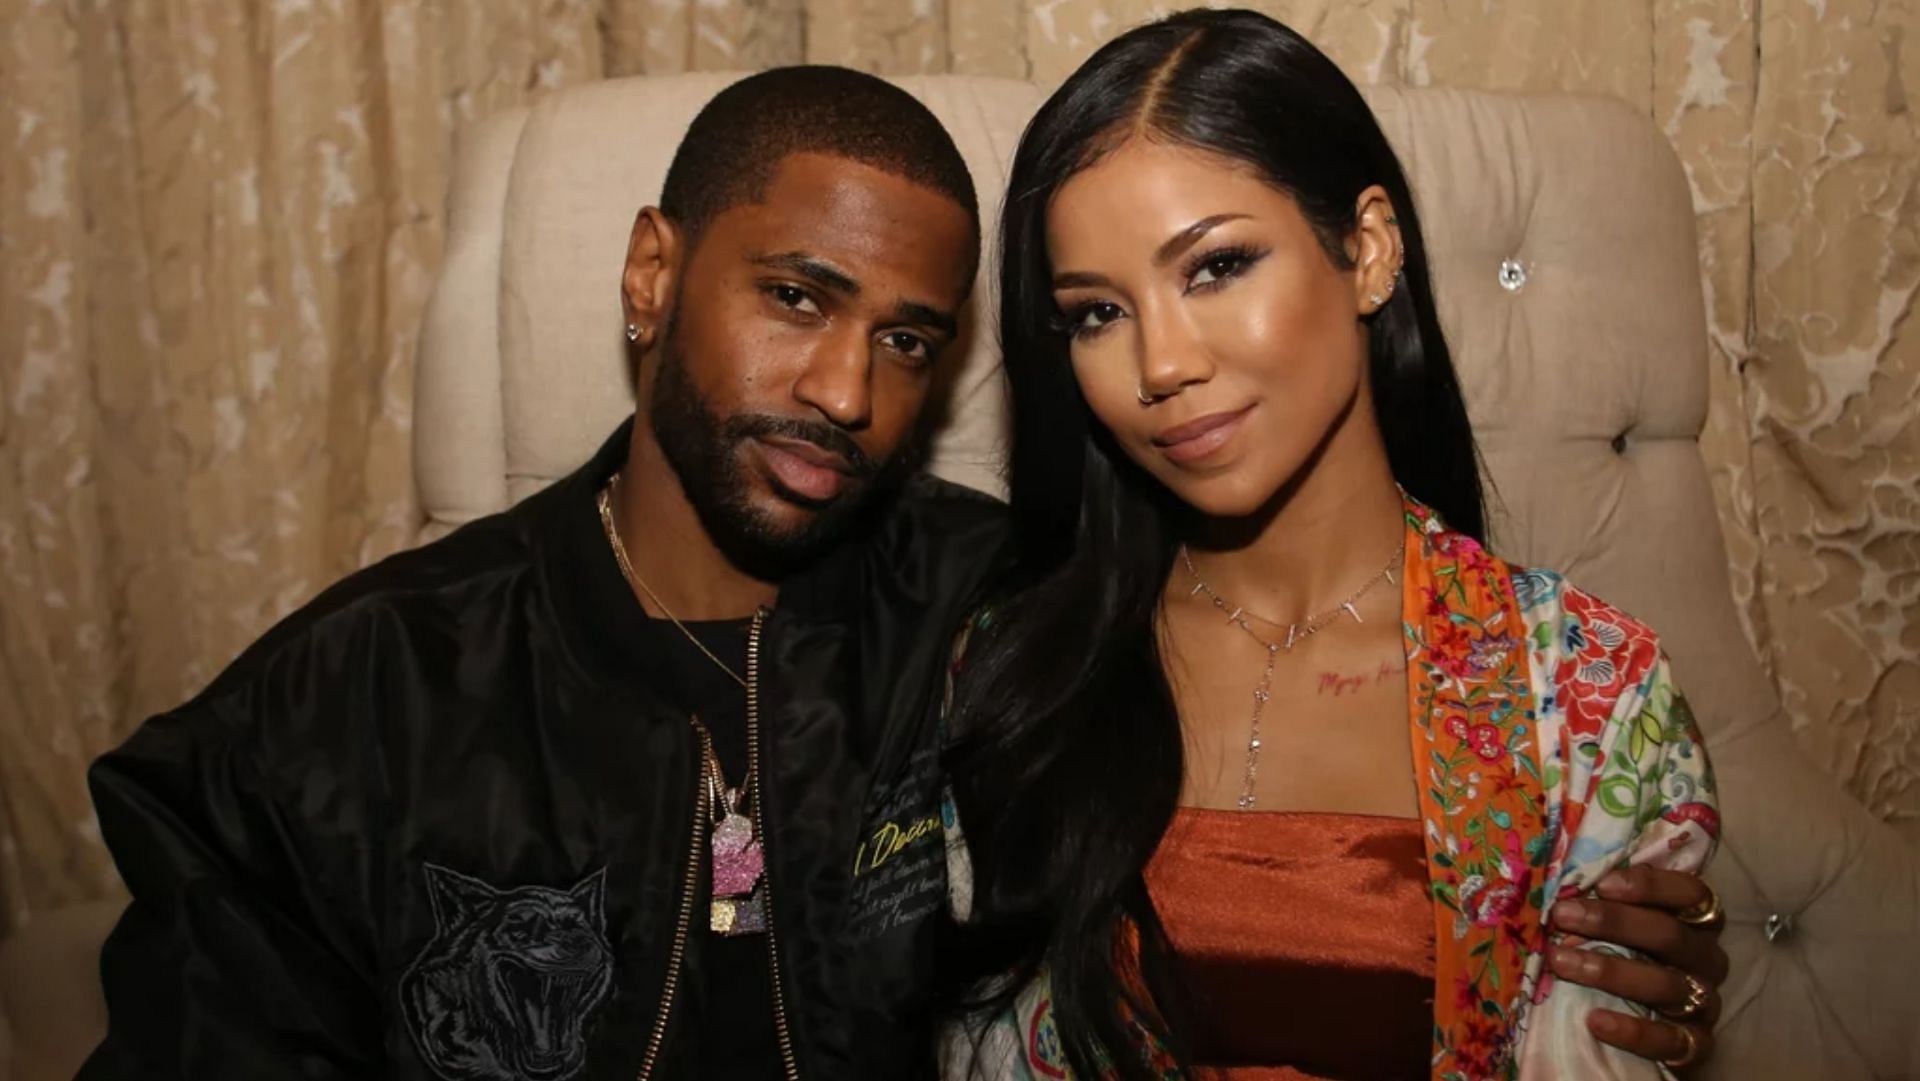 How did Jhene Aiko and Big Sean meet? Expectant couple reveals first